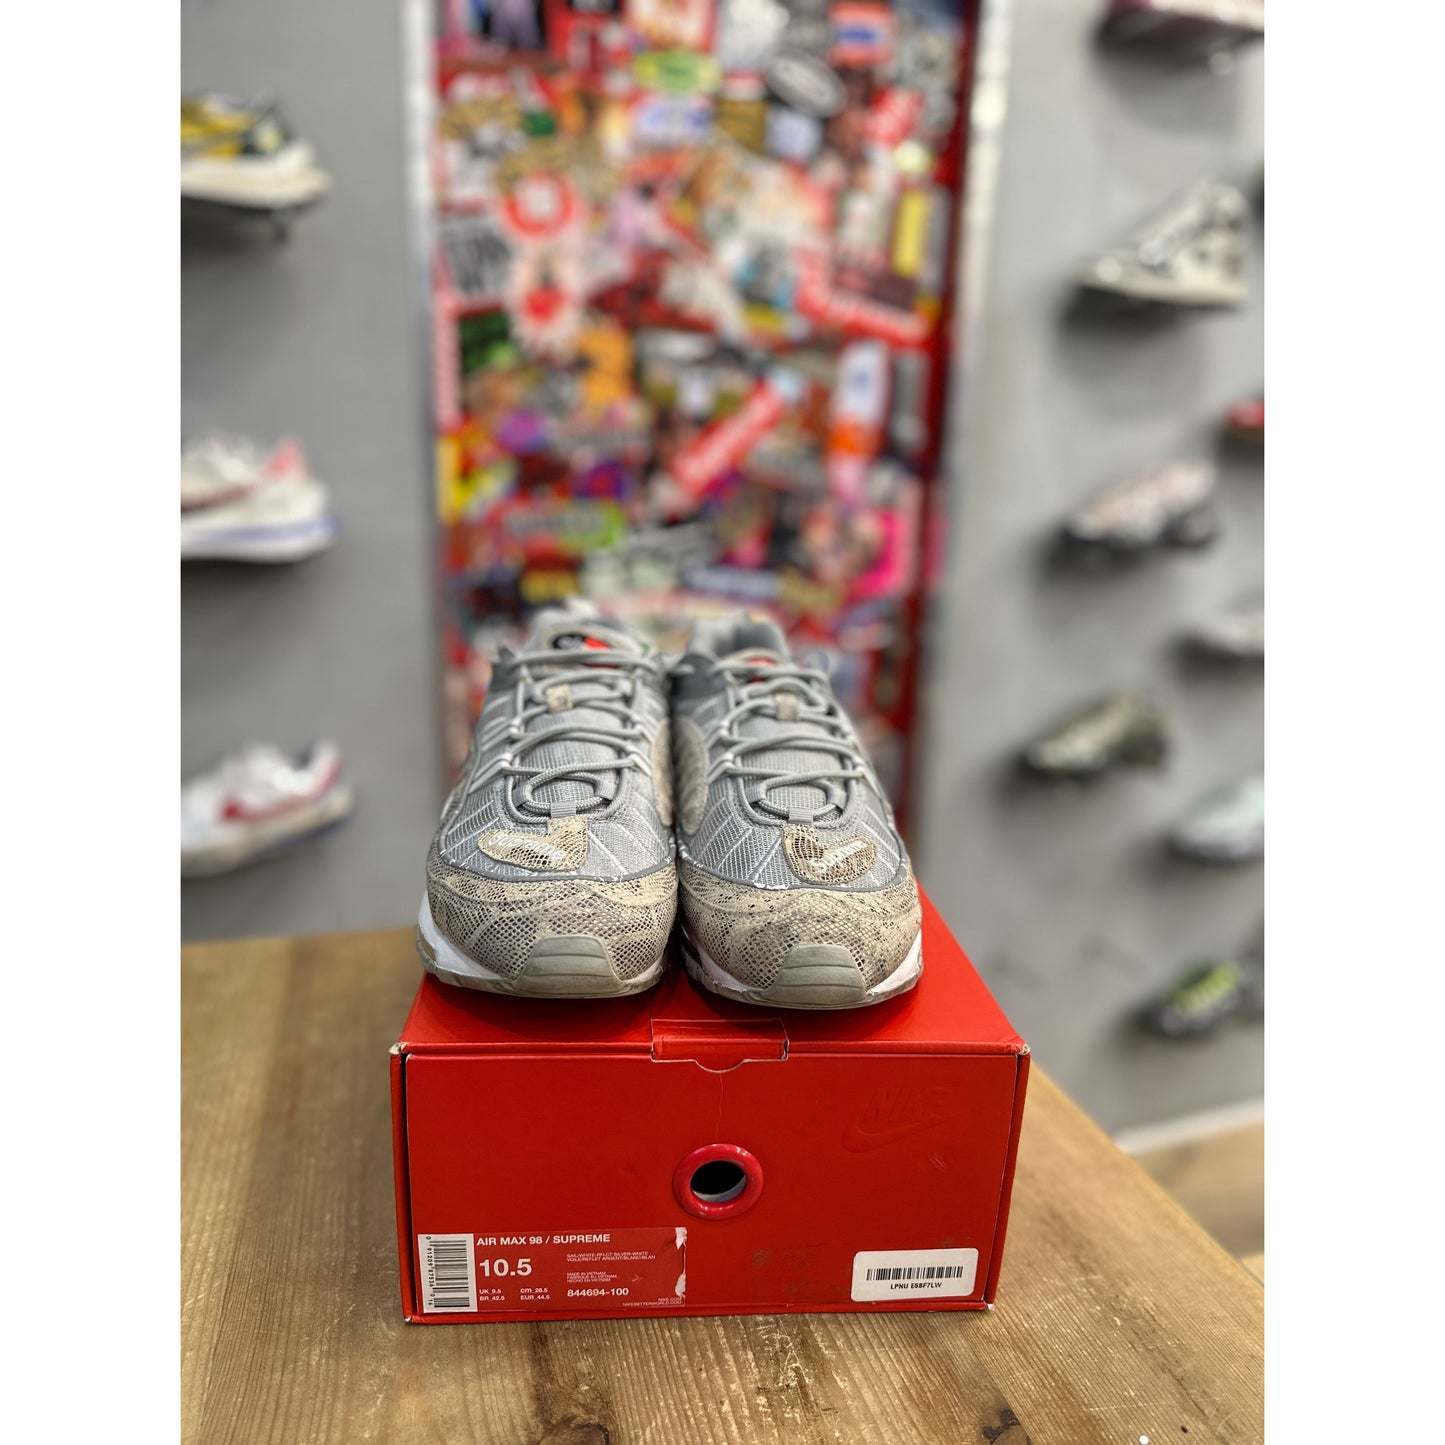 Nike Air Max 98 Supreme Snakeskin UK 9.5 by Nike from £175.00